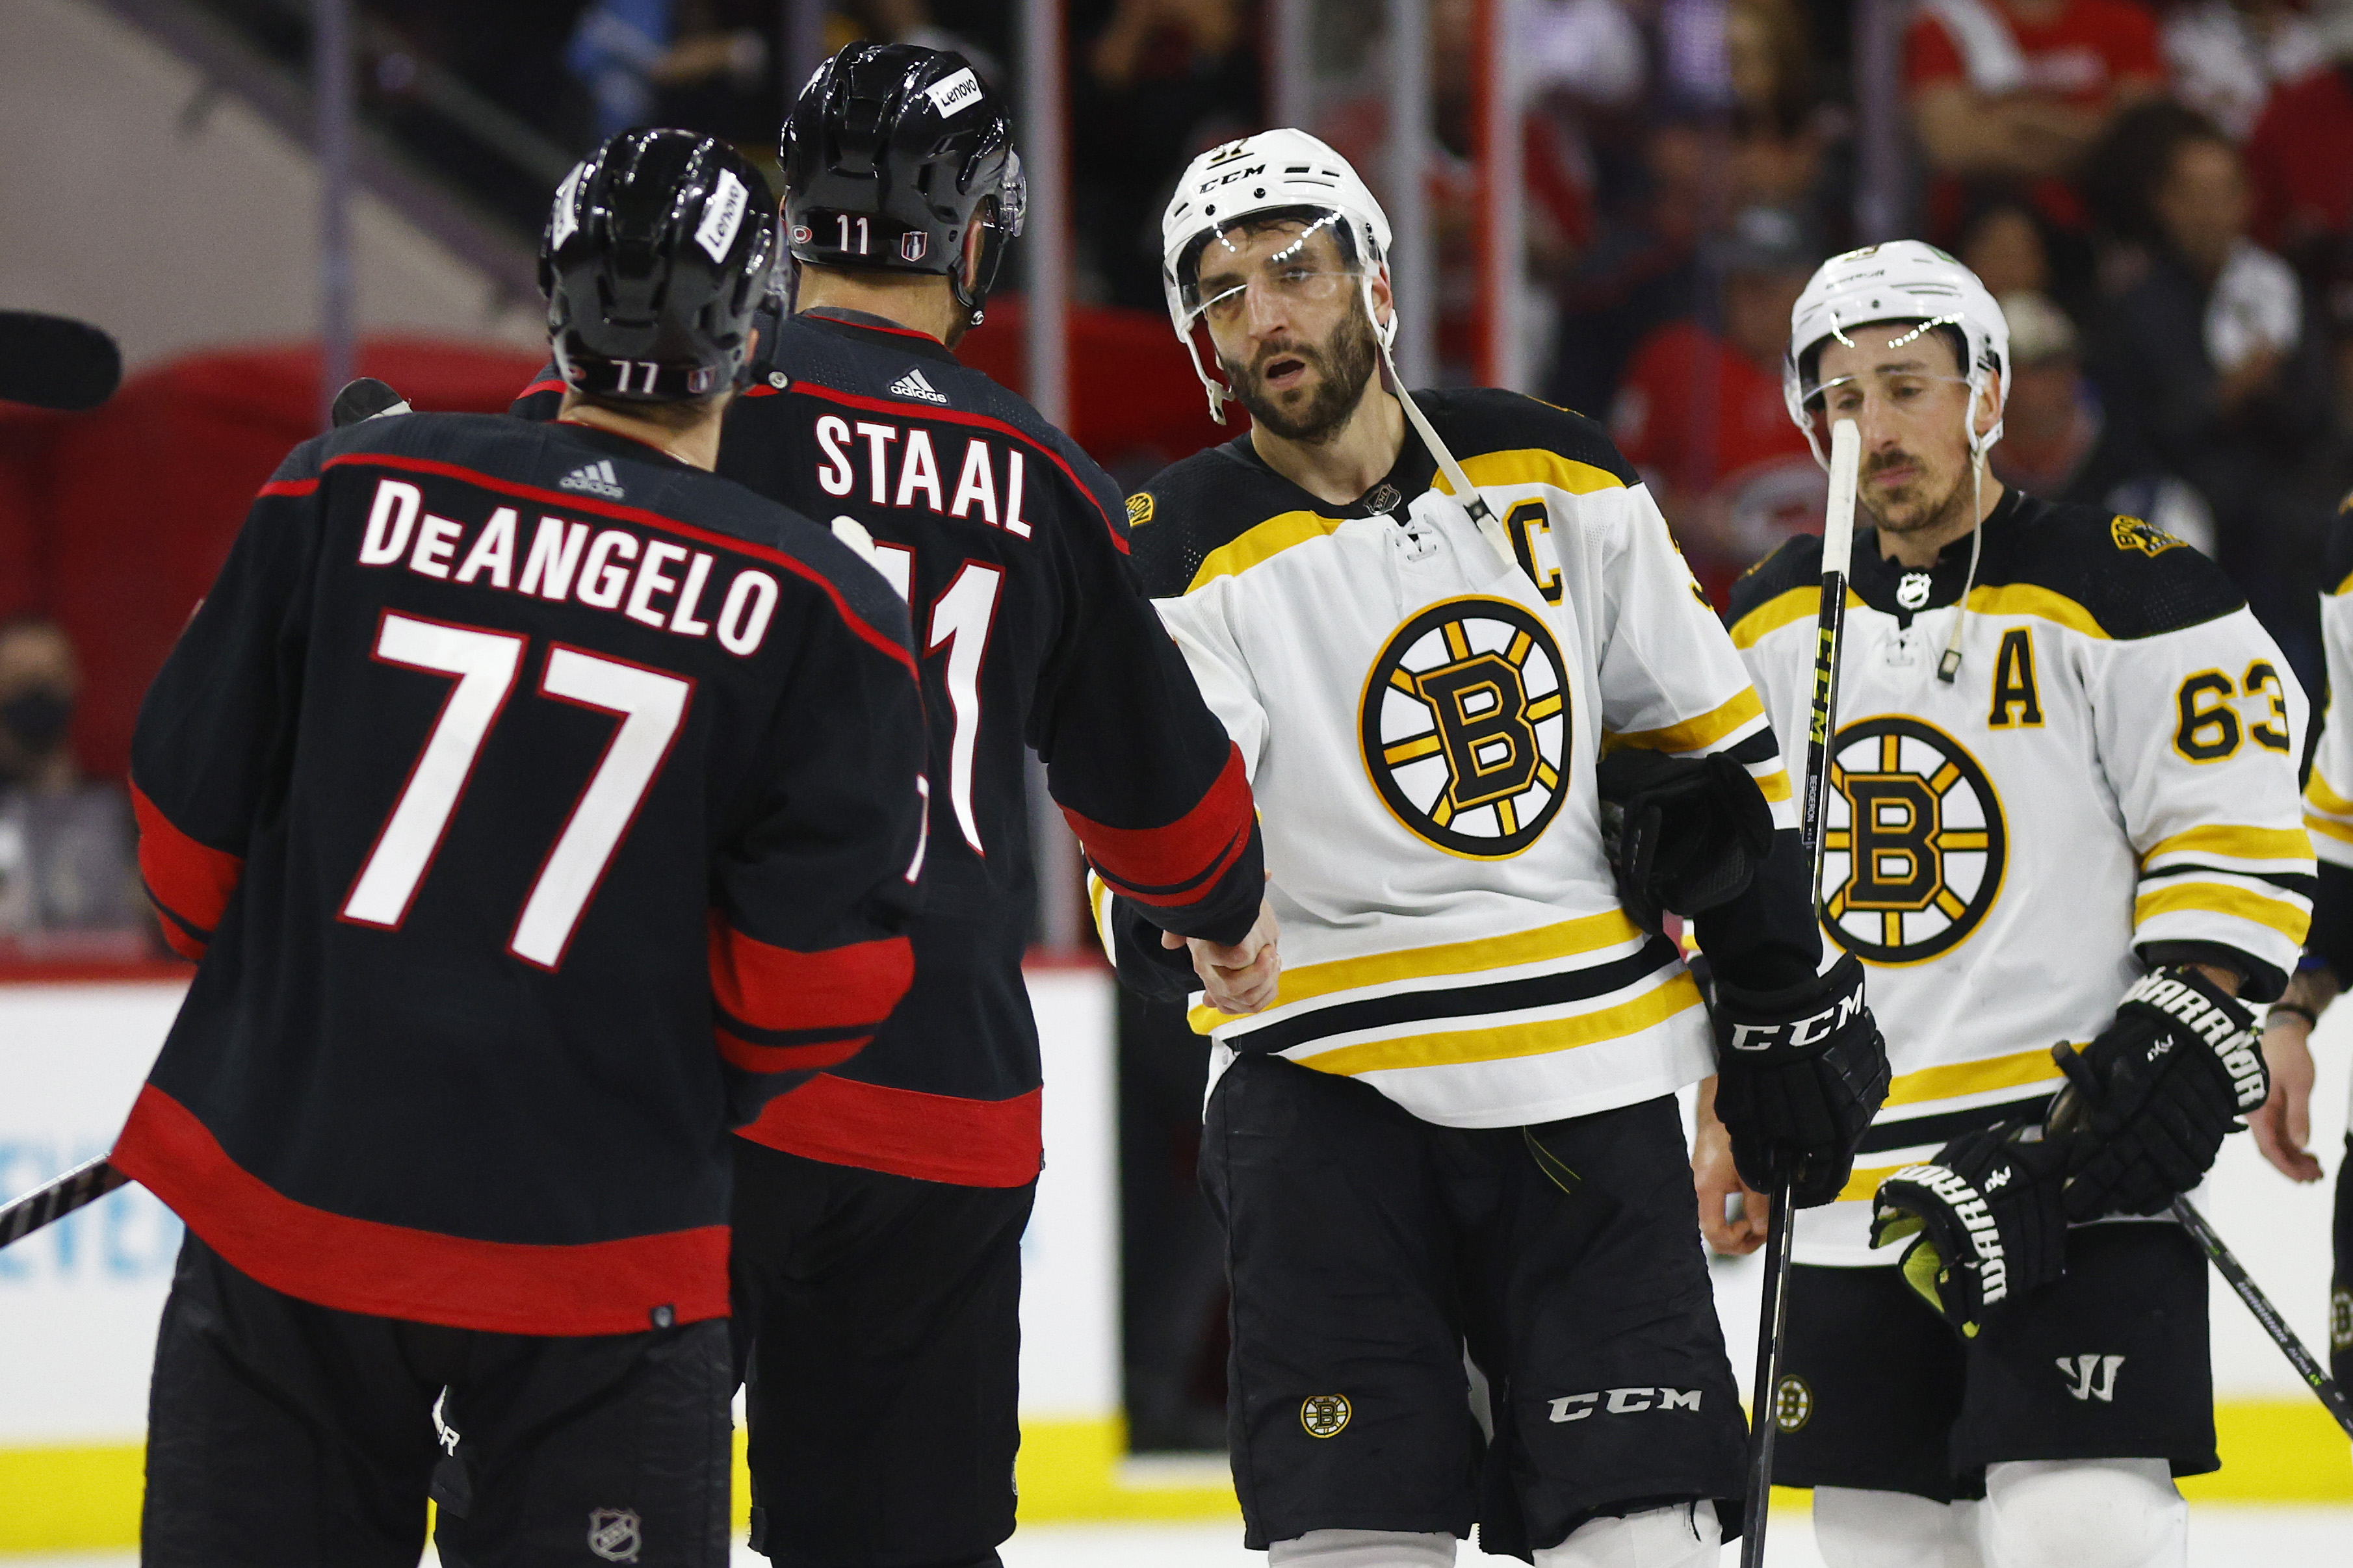 Bruins captain Bergeron to miss second straight playoff game